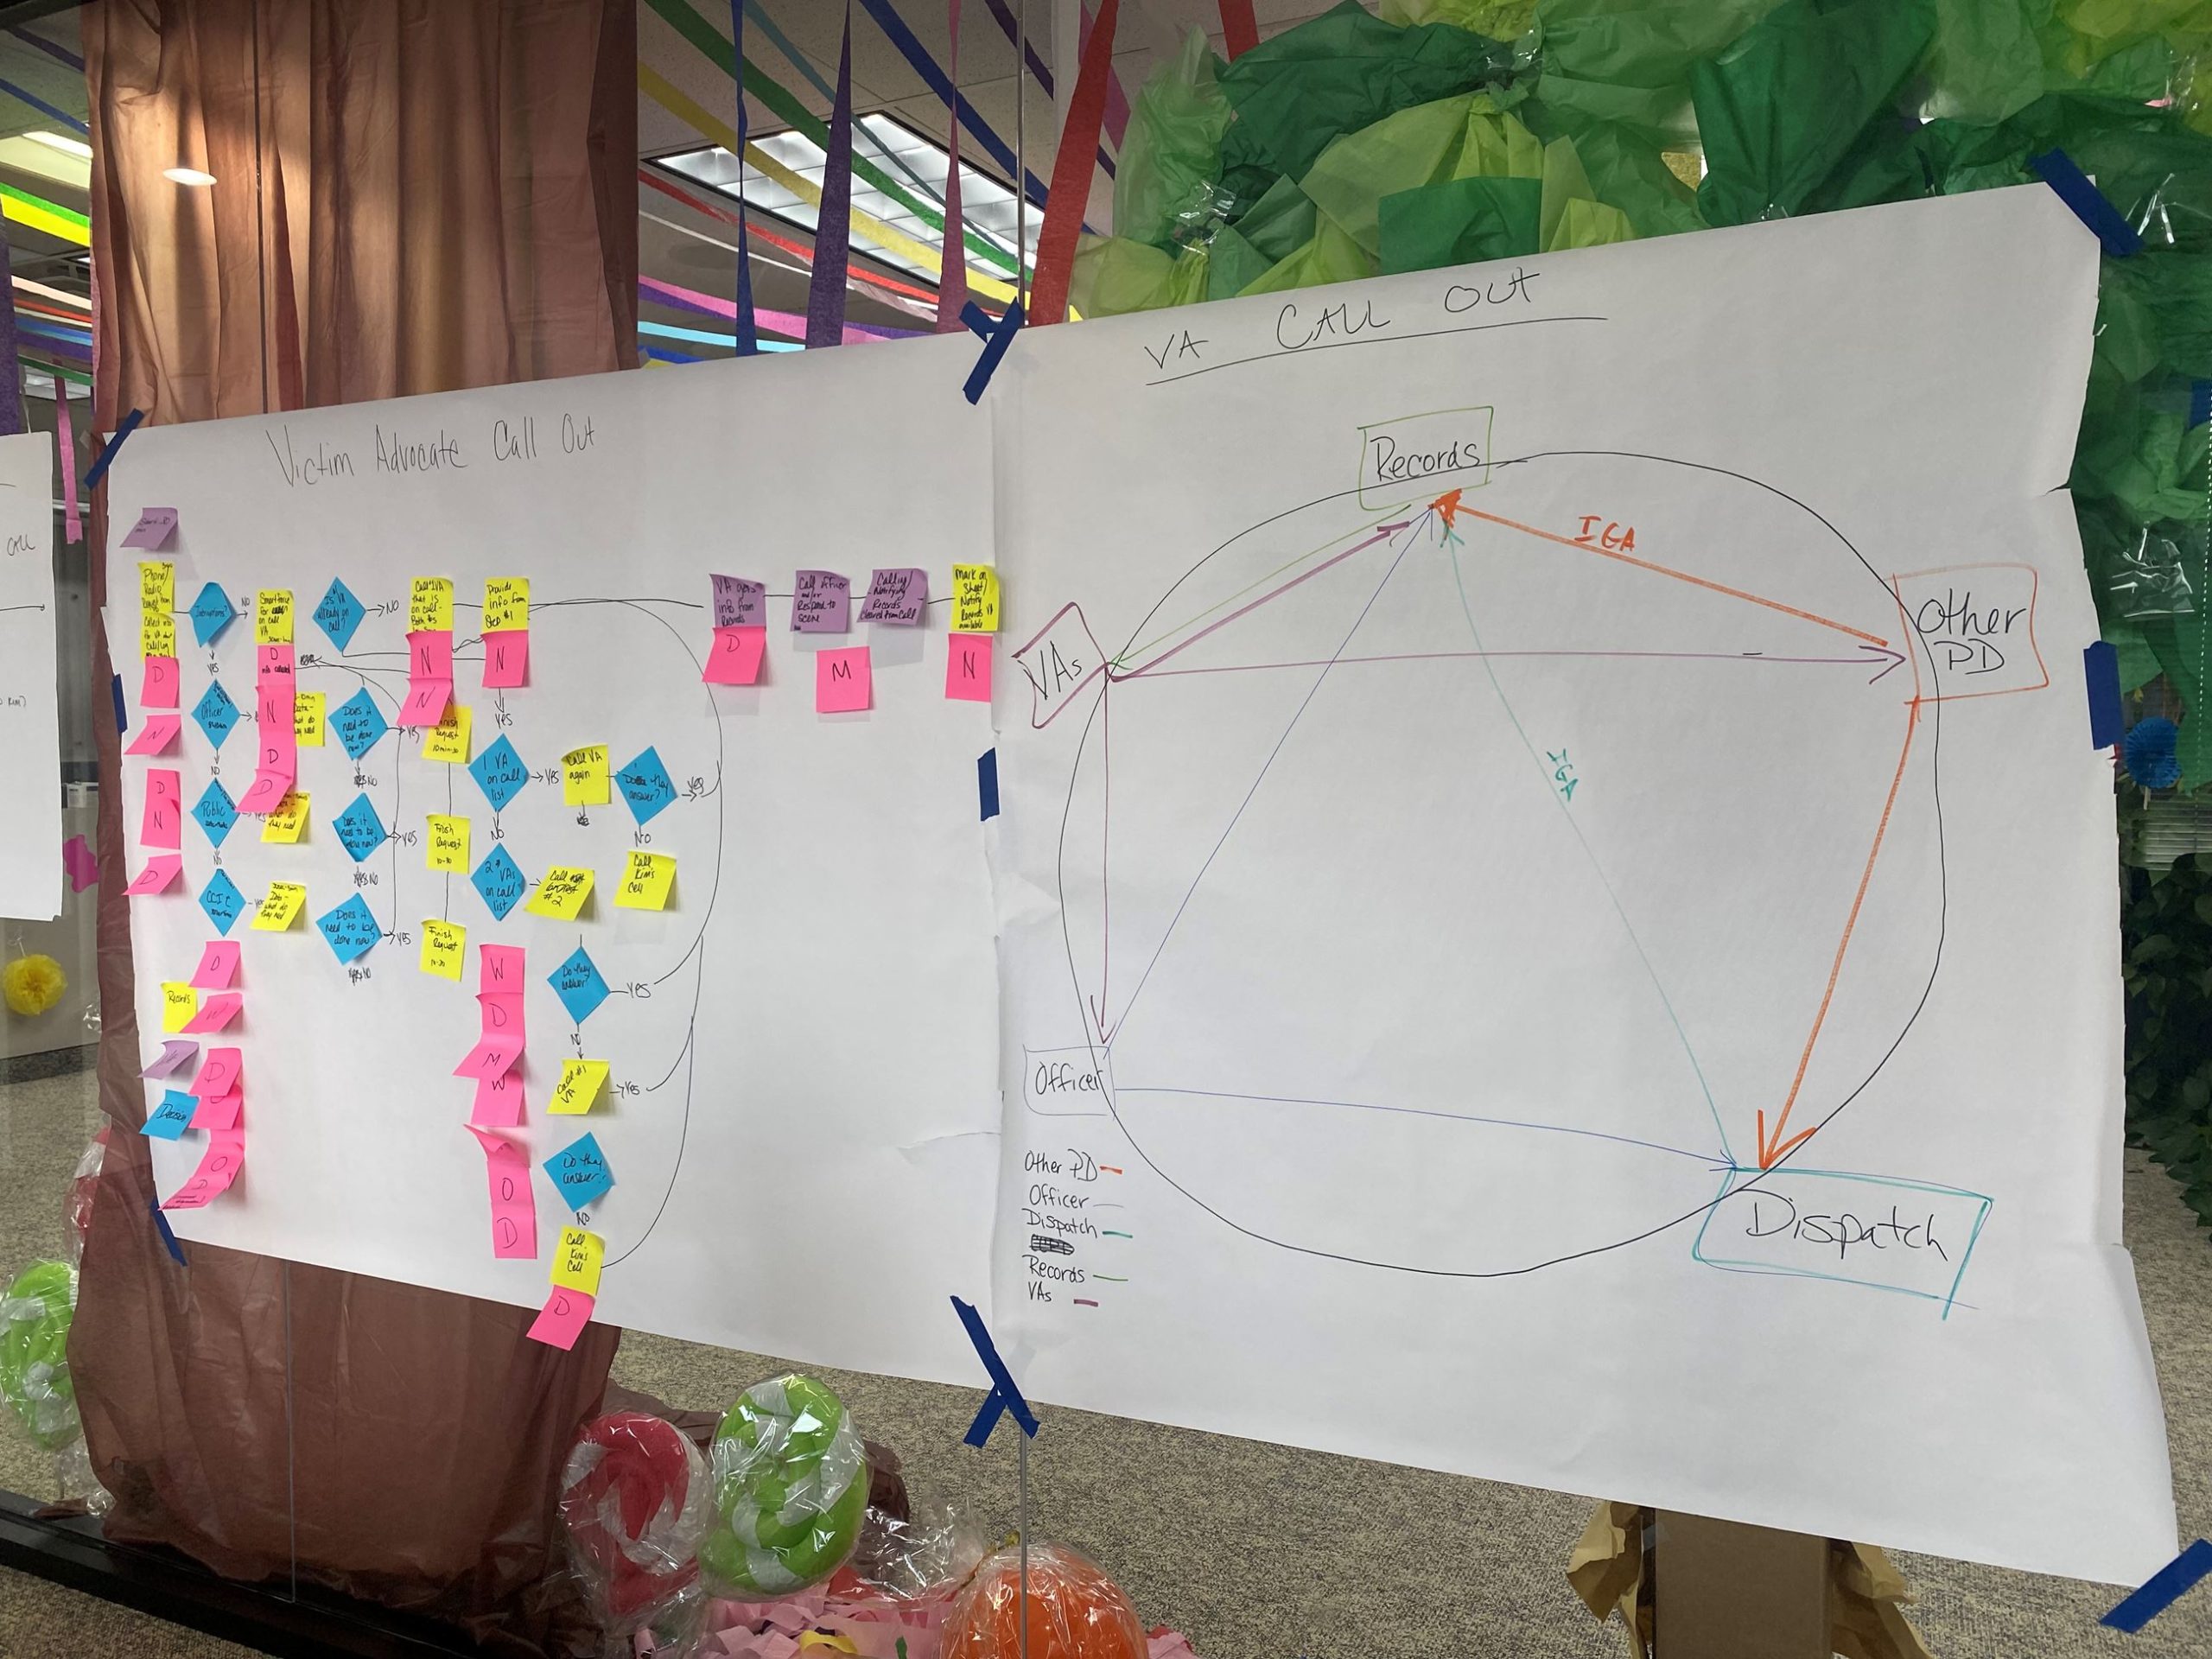 Big sheets of white paper taped onto a glass wall or mirror, with different colored sticky notes on the left, and a circular diagram on the right.